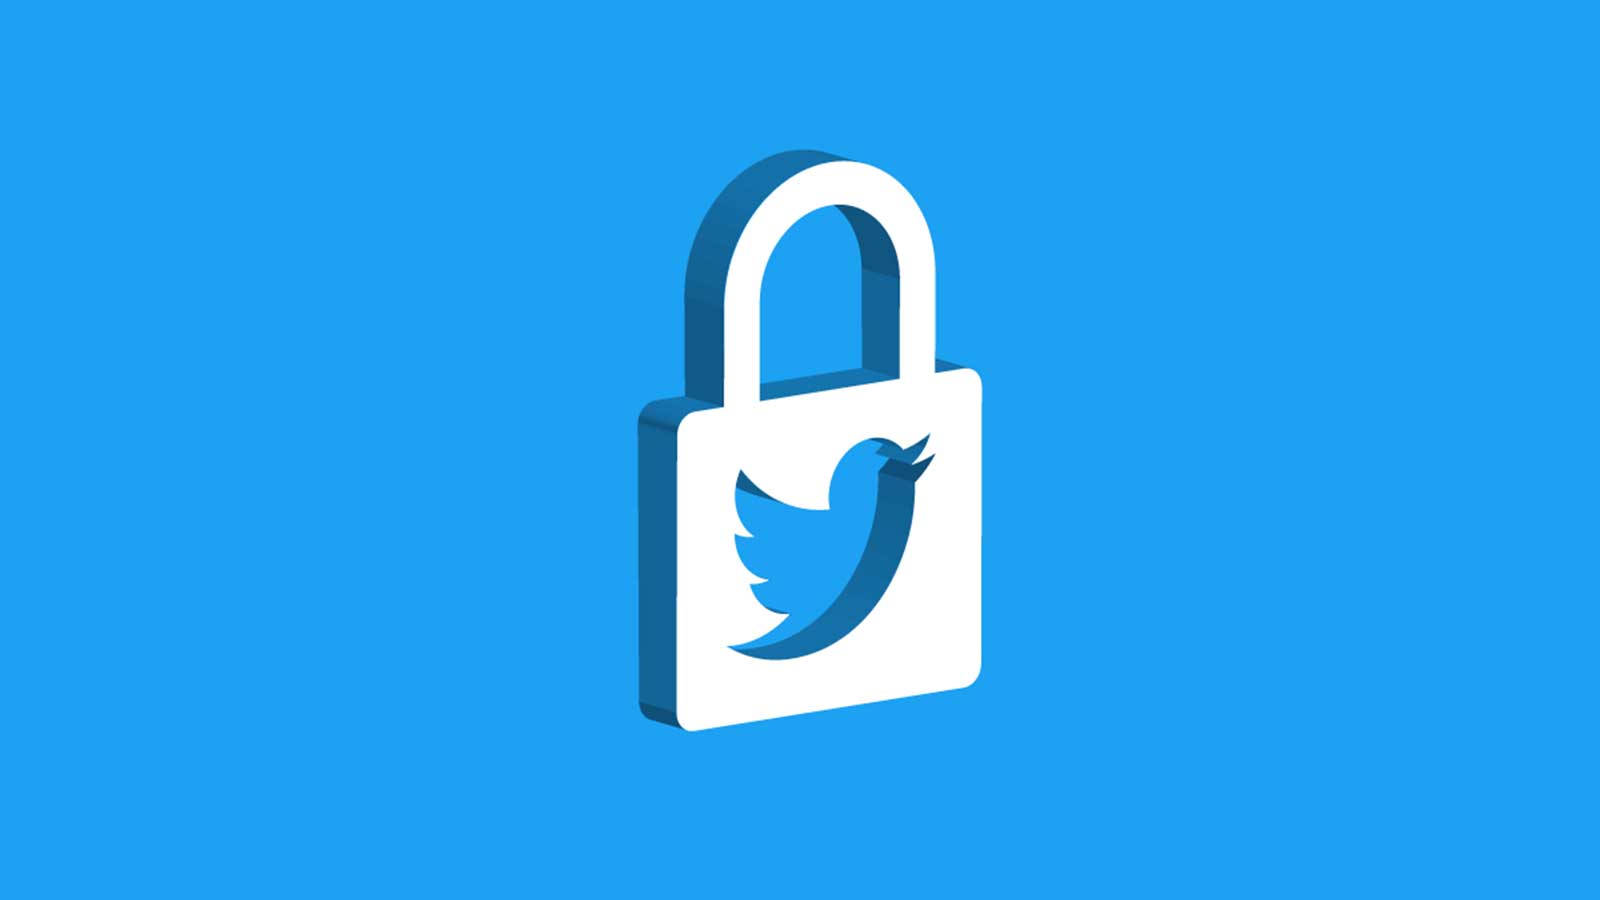 Twitter Verification Code Not Received: How to Fix It